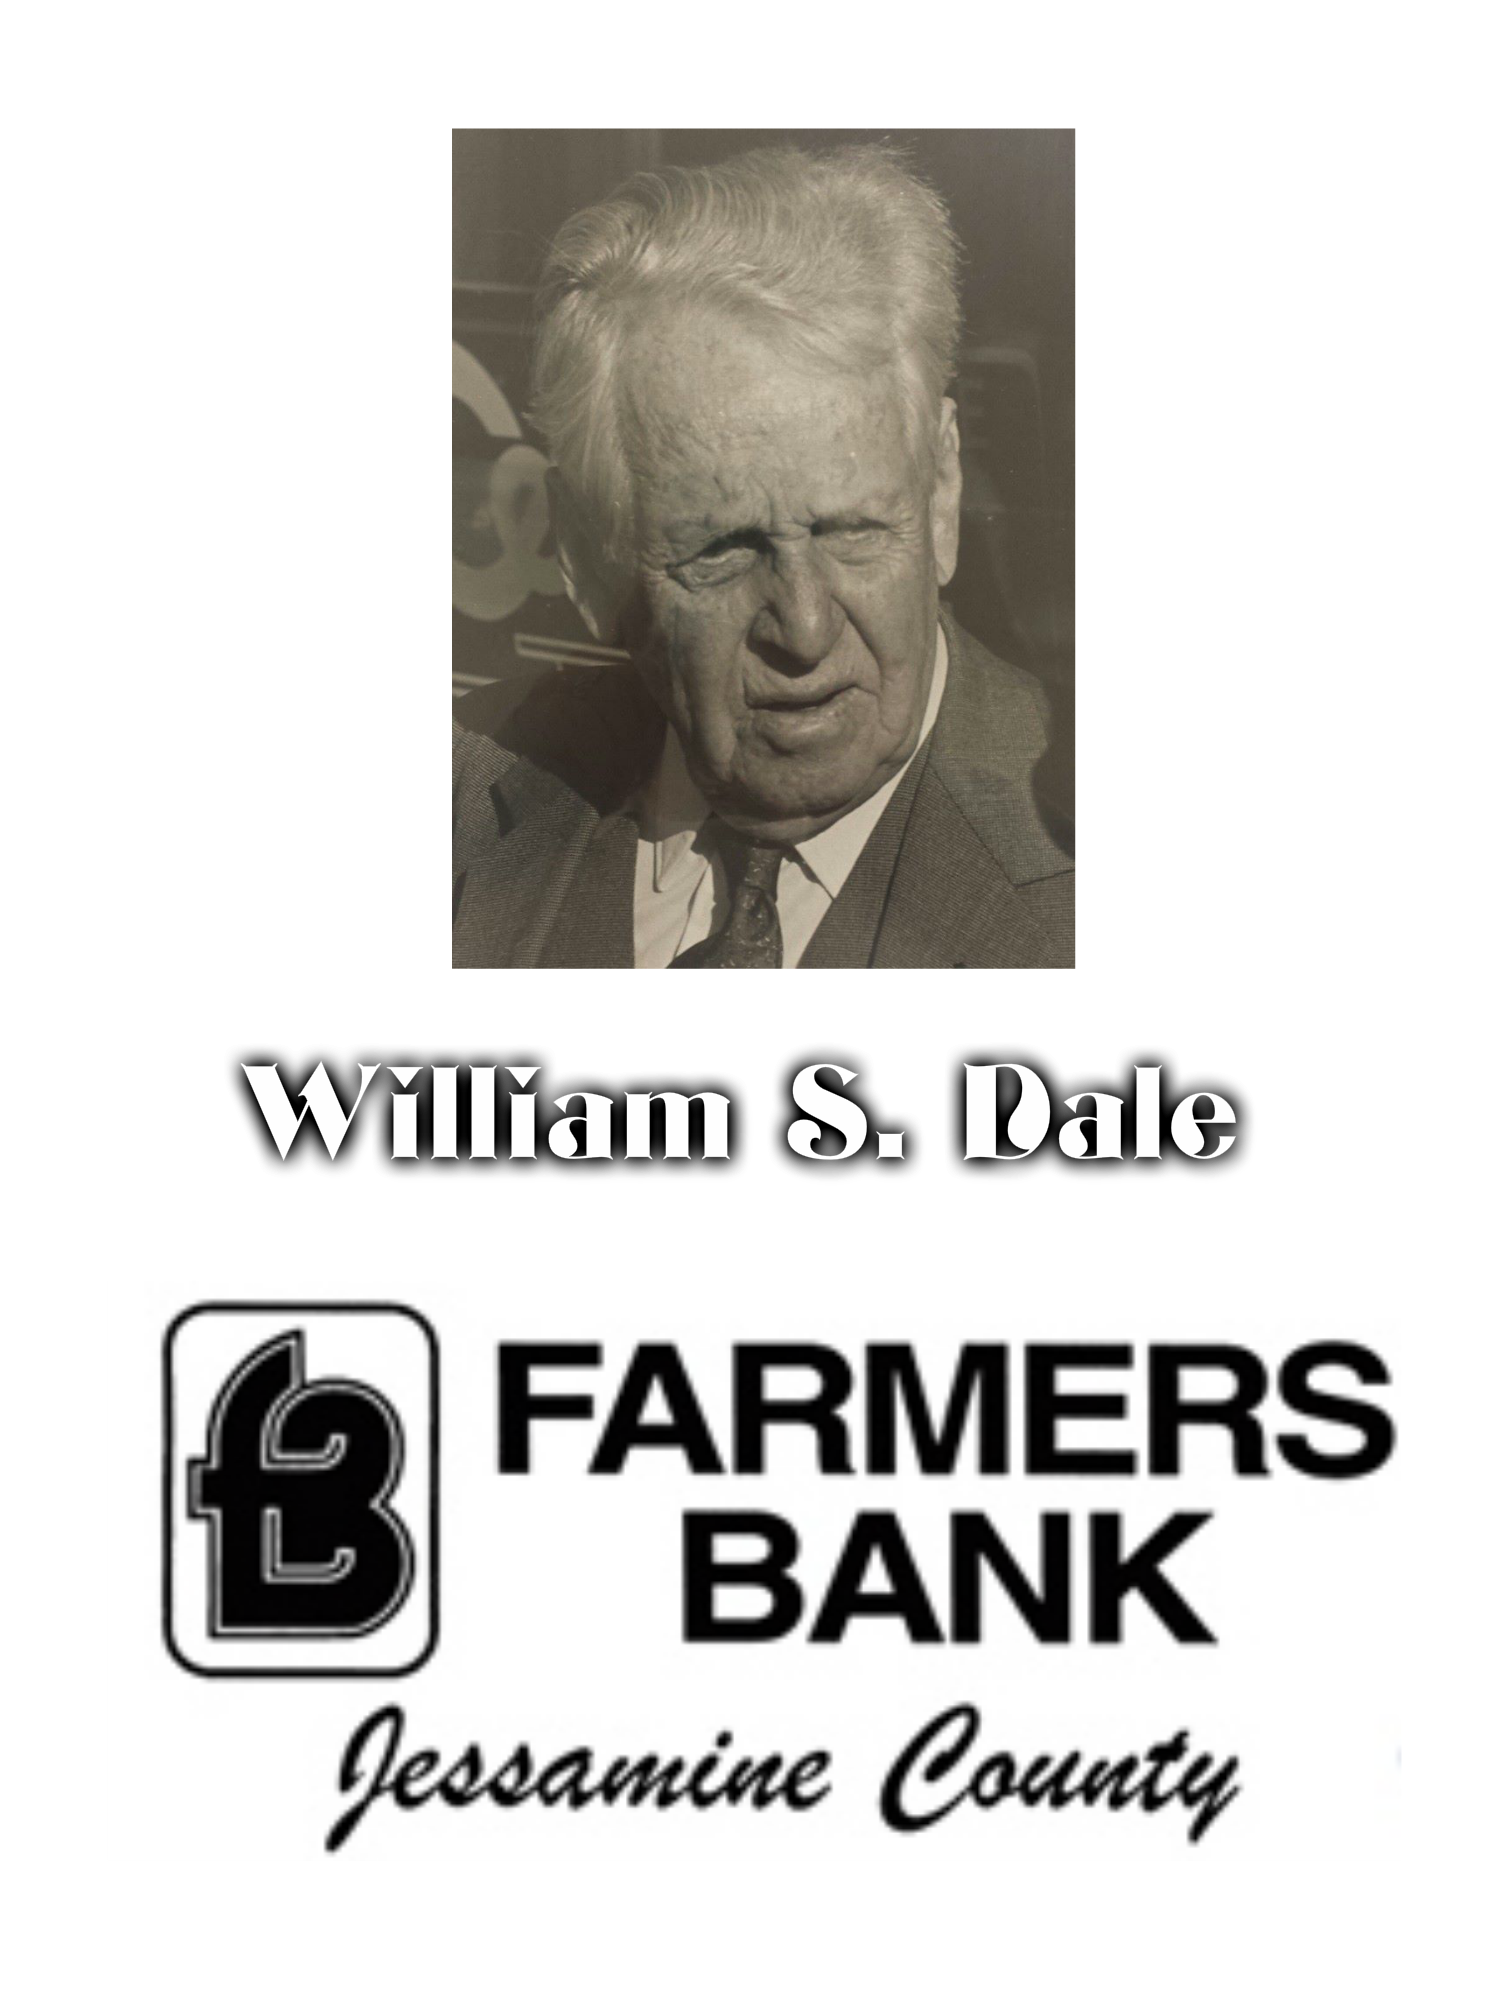 The Farmer's Bank of Jessamine County &amp; William S. Dale (with son, Landy Dale) - 4/2/16 - # 68